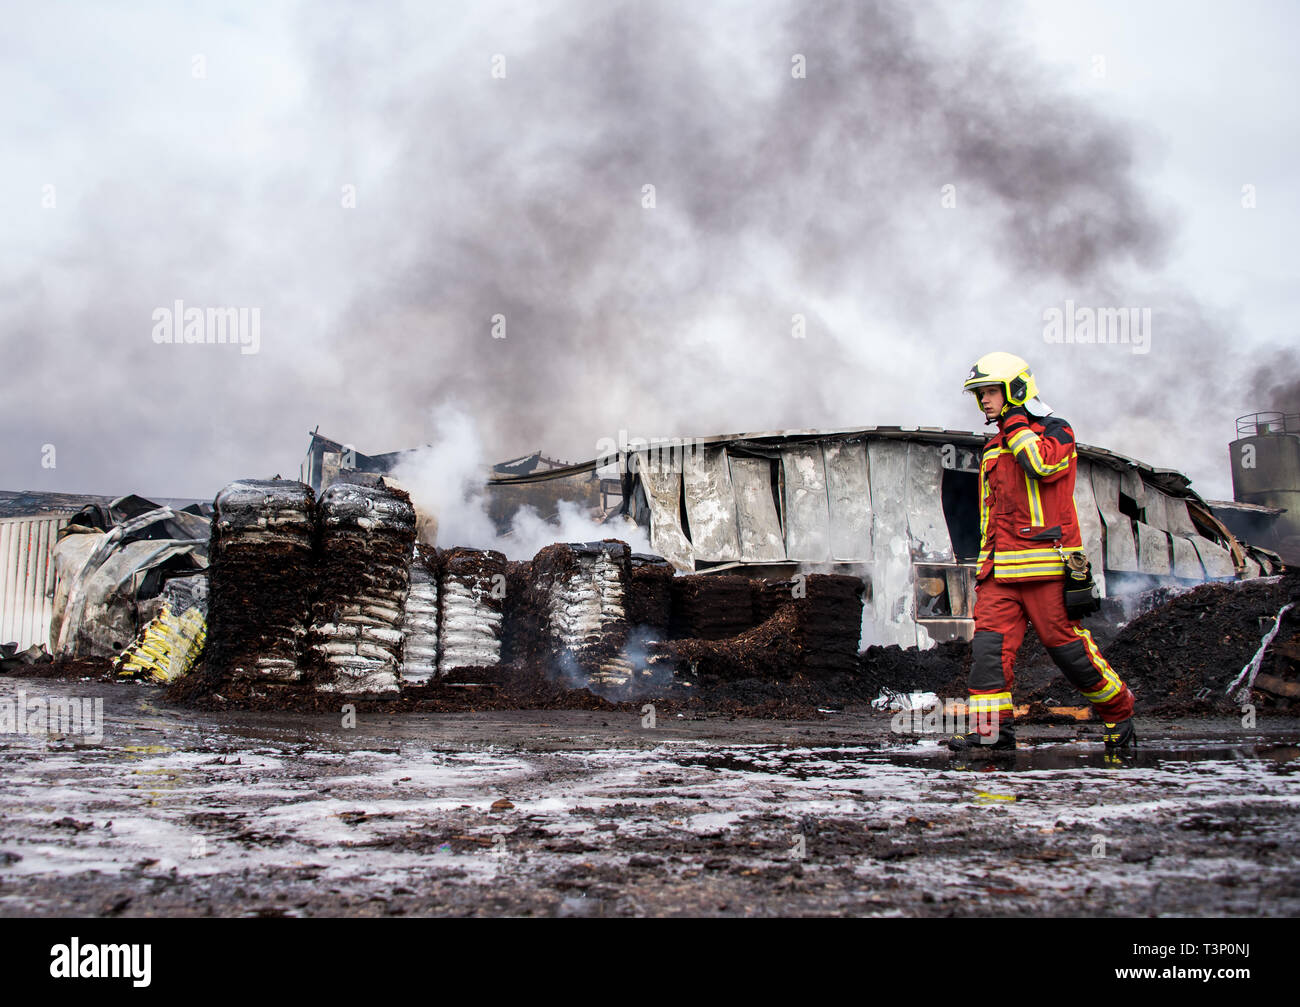 Roggendorf, Germany. 11th Apr, 2019. A firefighter walks along burnt pallets with bark mulch during a major fire in a peat factory. Several warehouses and production halls have gone up in flames there. Credit: Daniel Bockwoldt/dpa/Alamy Live News Stock Photo